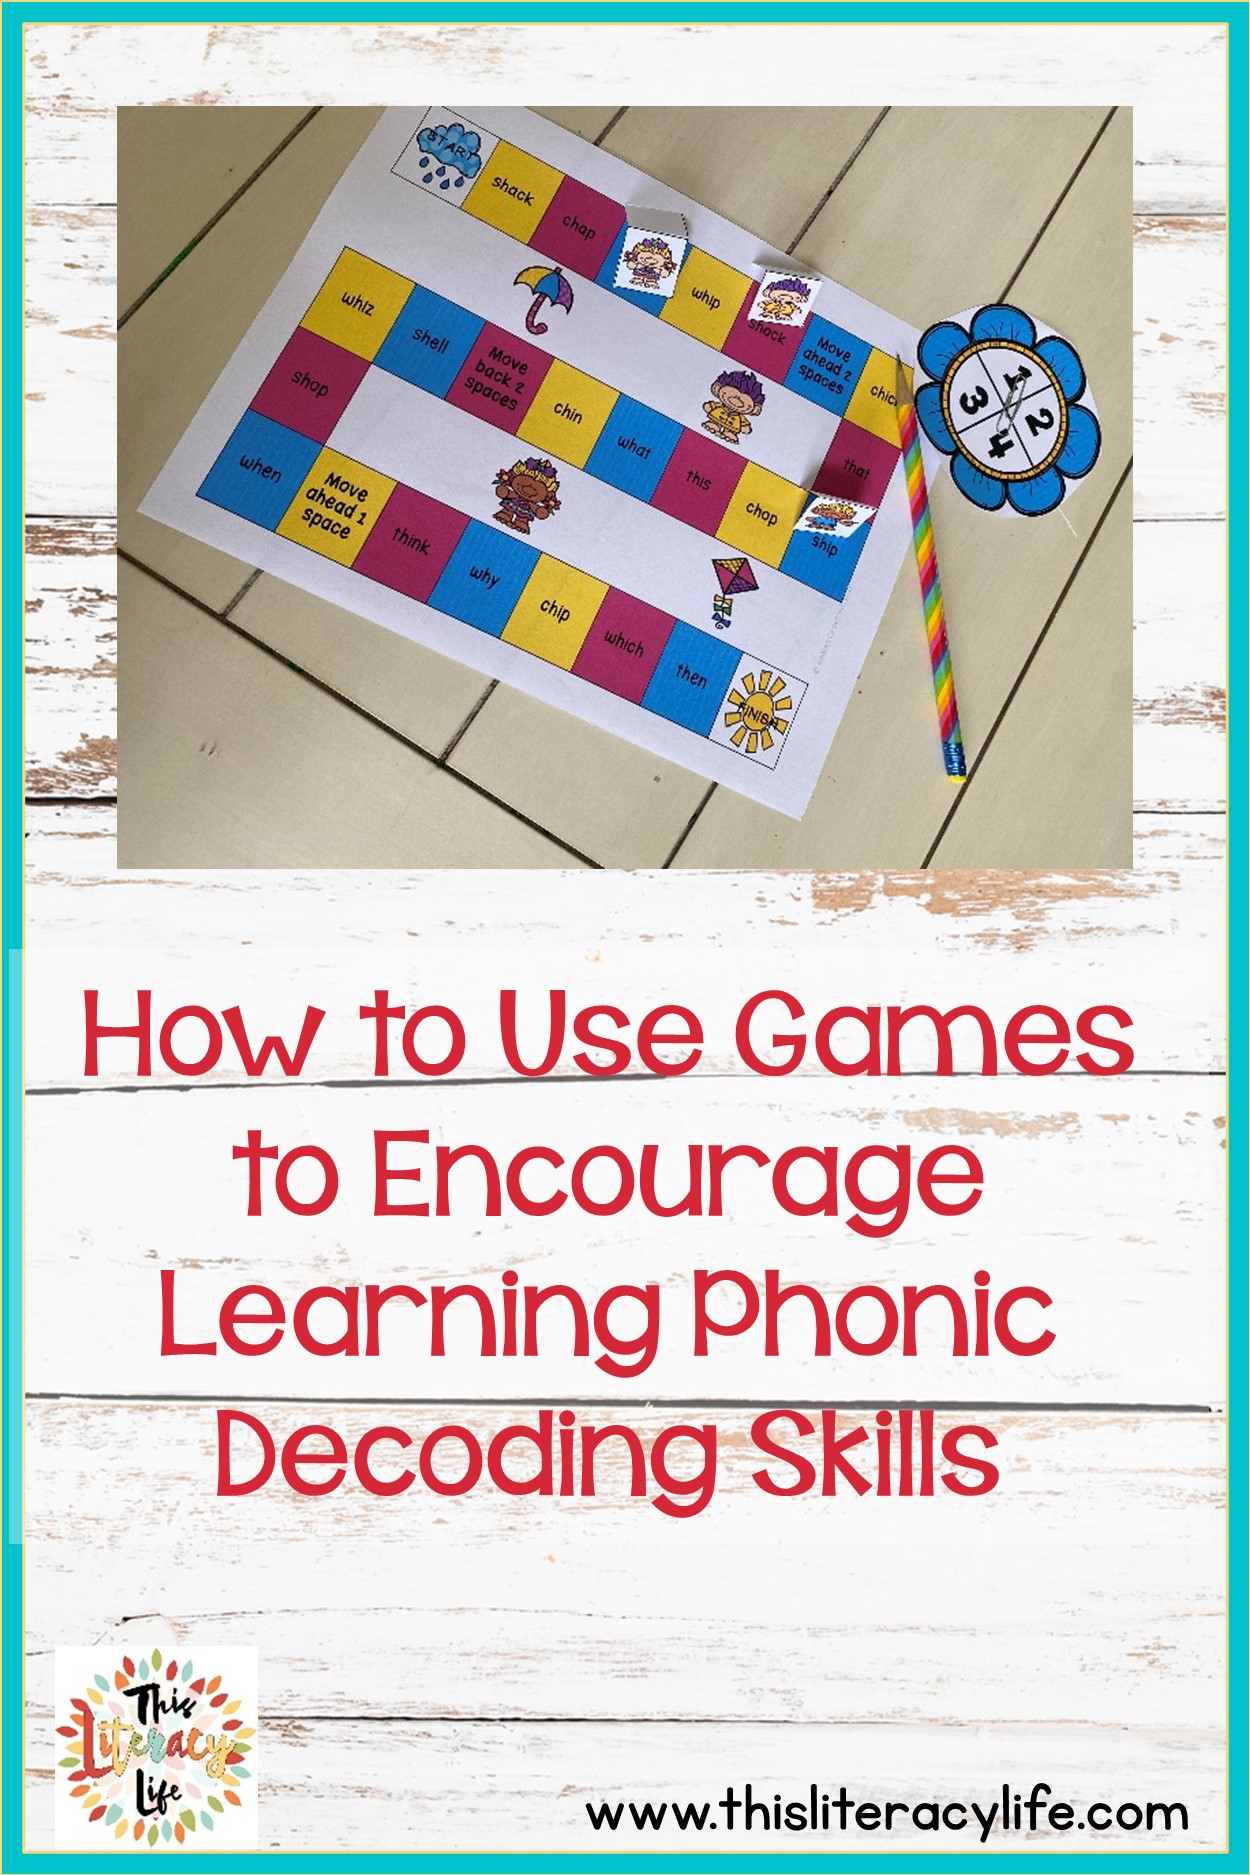 4 Ways to Use Games for Learning